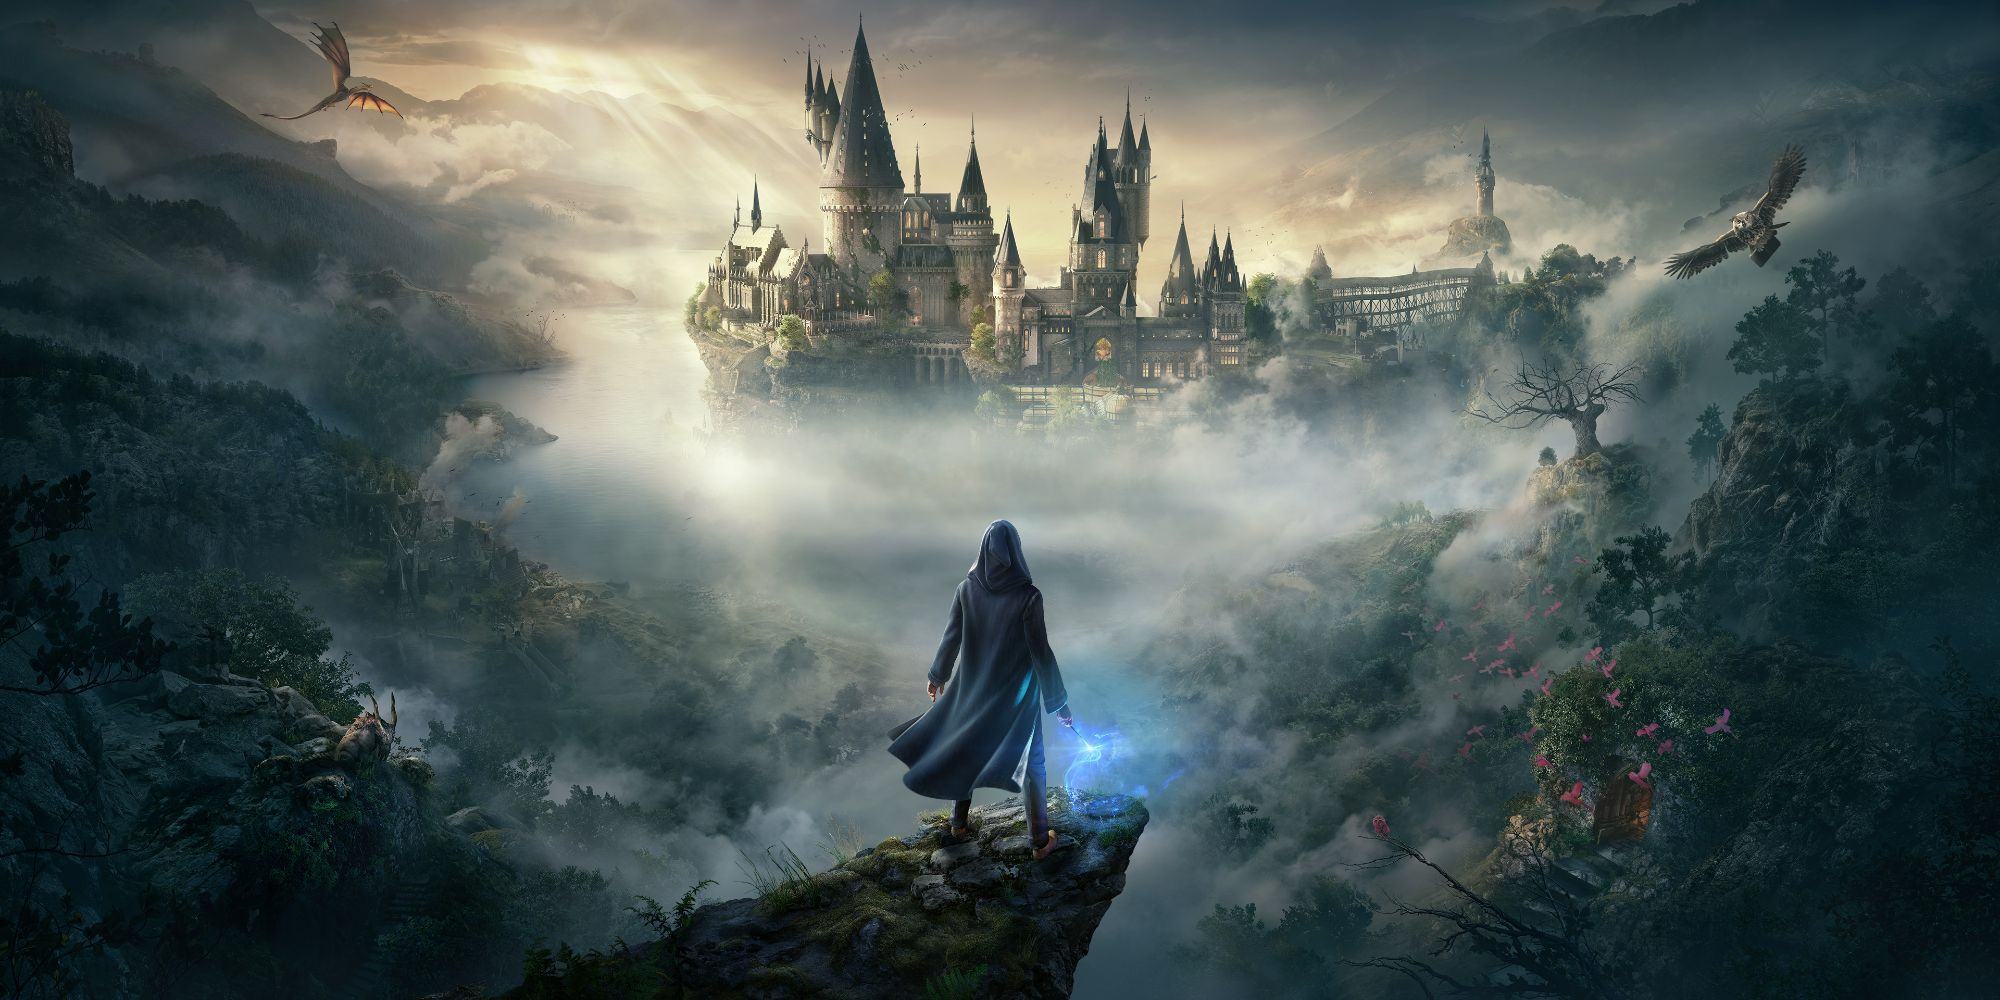 An image from the game Hogwarts Legacy showing a wizard looking out at Hogwarts Castle surrounded by fog